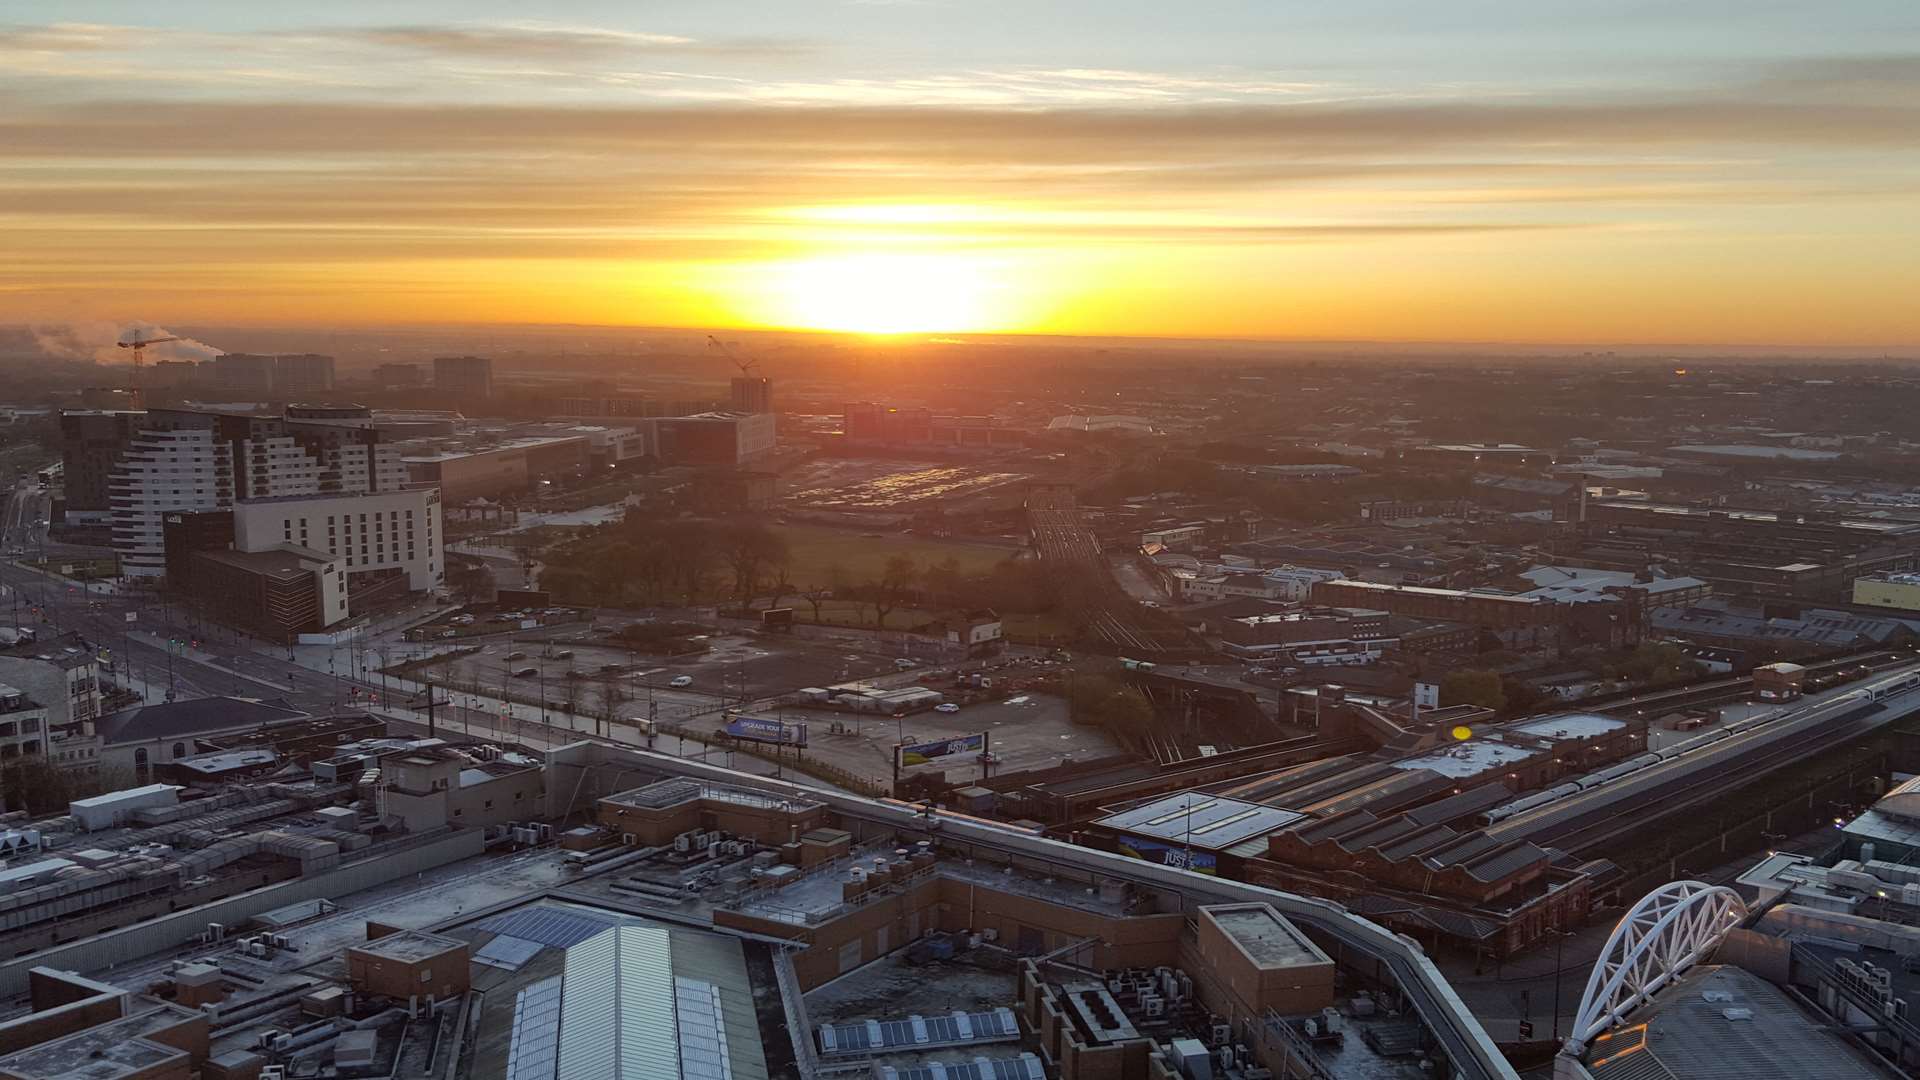 Sunrise from one of the Staying Cool Clubman apartments at the Rotunda, Birmingham